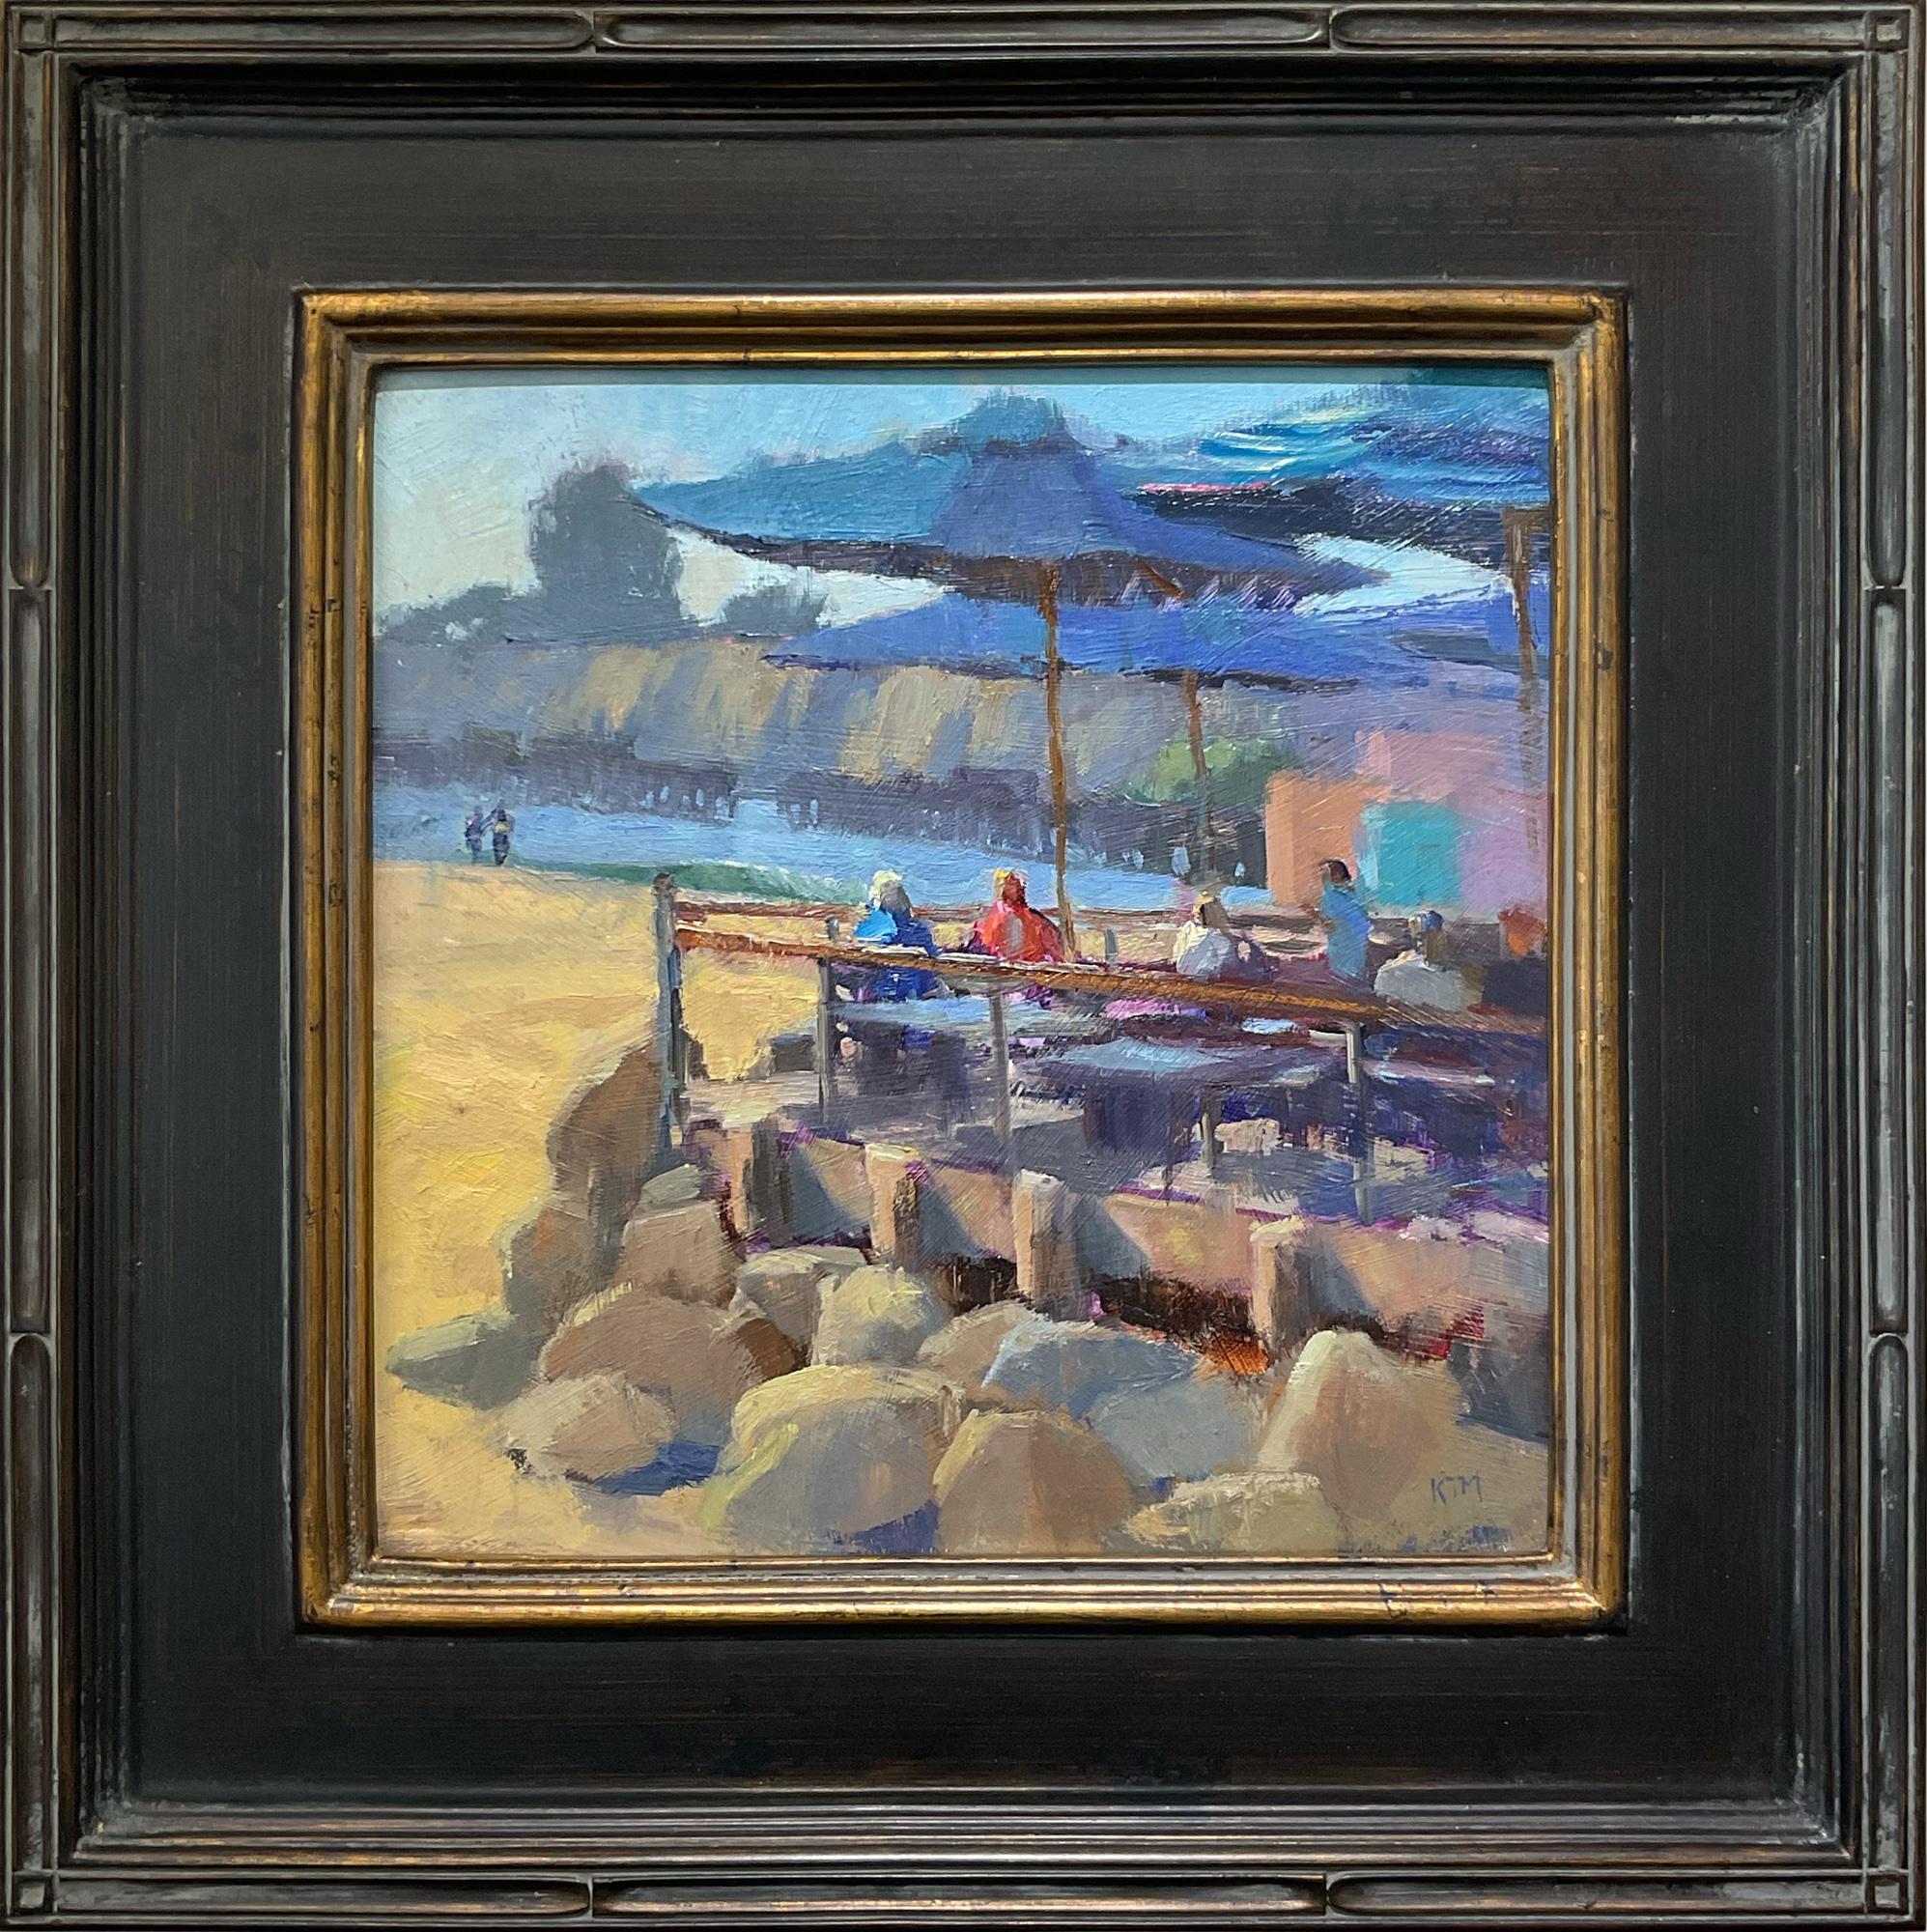 Kristian Matthews Landscape Painting - "Lunch on the Beach" A Plein Air Oil Painting of Capitola Beach with Ocean